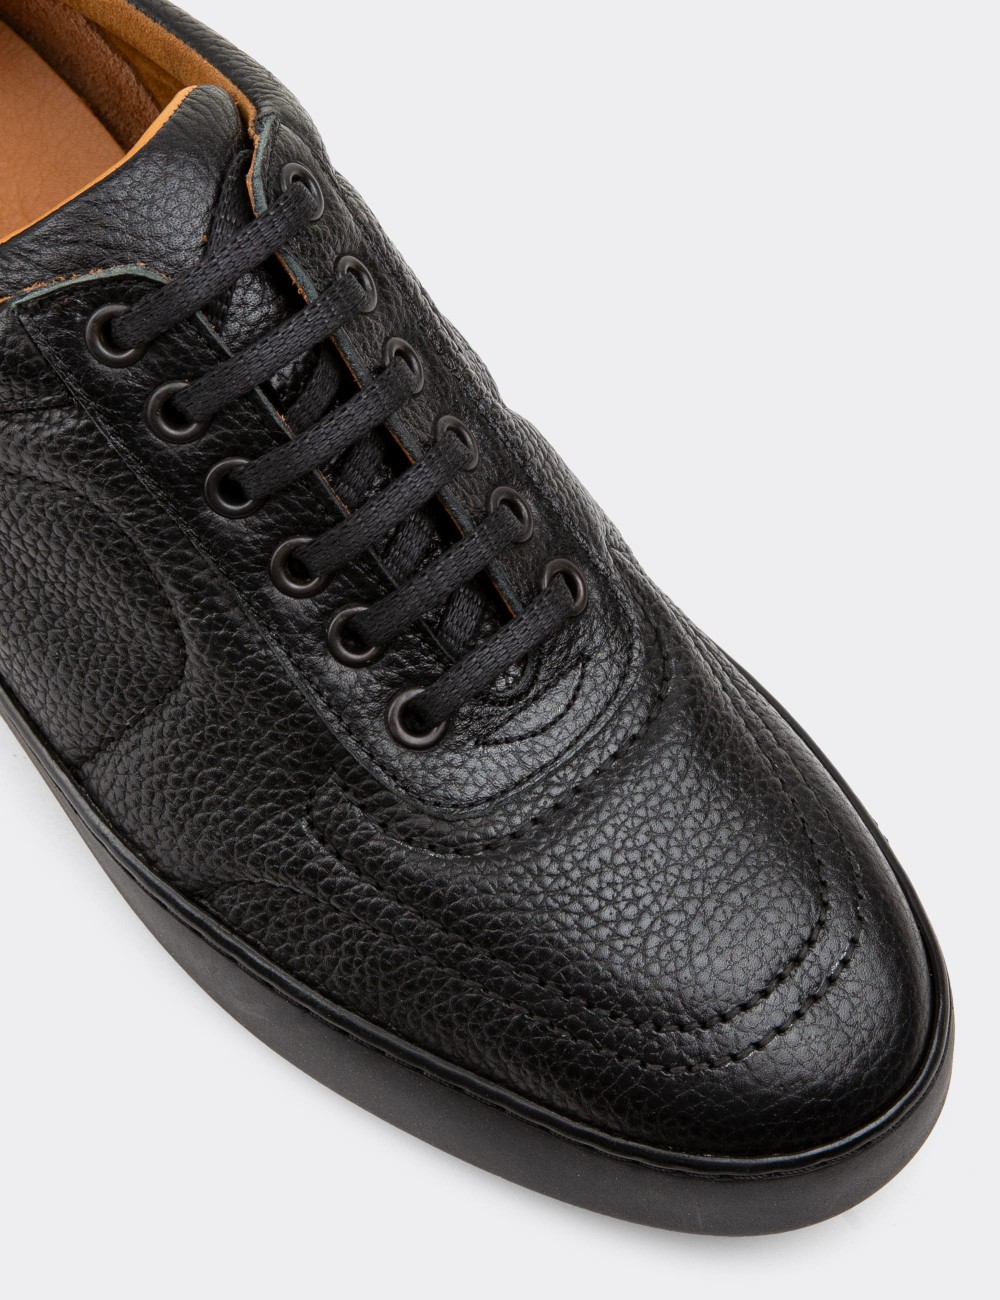 Black  Leather Sneakers - 01876MSYHC01